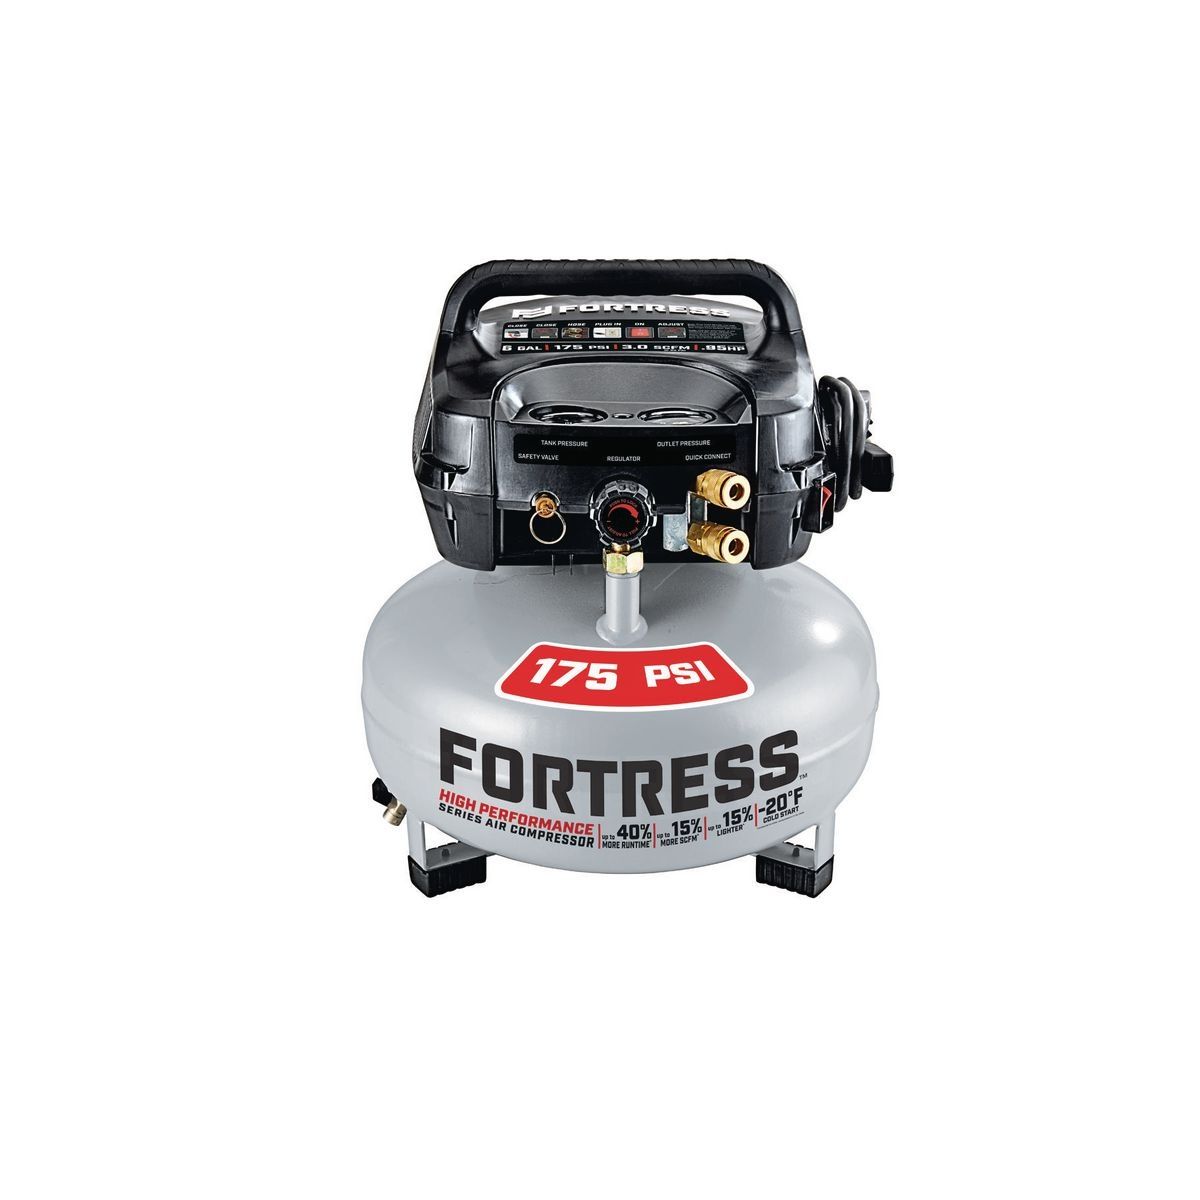 FORTRESS 6 gallon 175 PSI   High Performance Hand Carry Jobsite Air Compressor